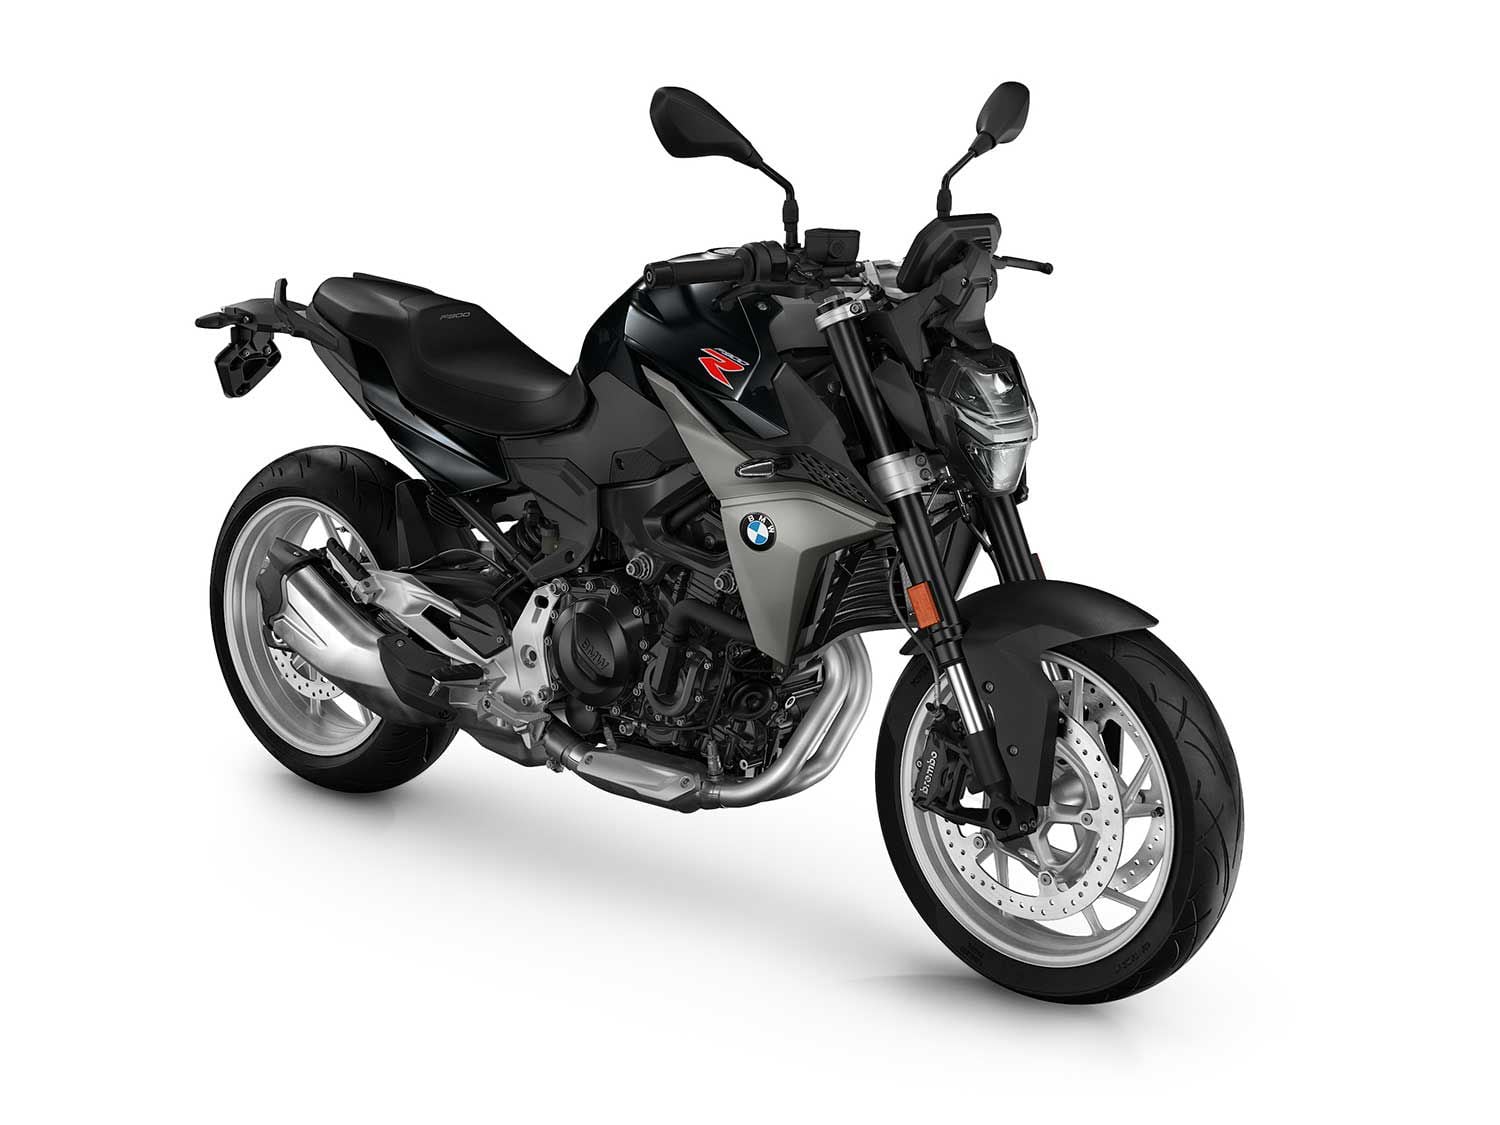 NEW MOTORCYCLE: BMW「F900R」 in New Colors & with New Electronic Controls